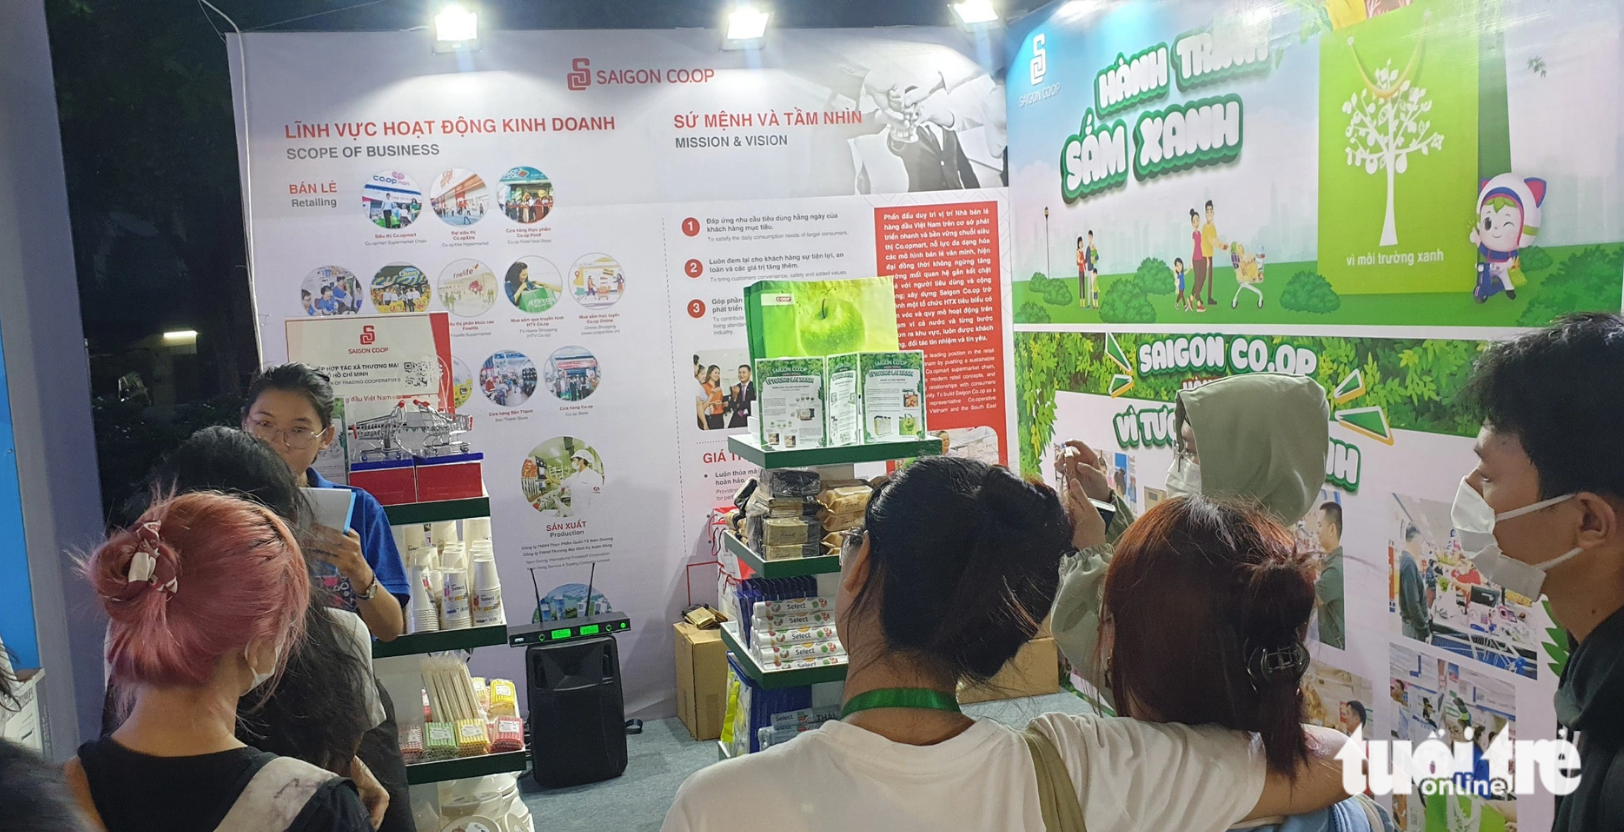 A booth showcasing green products attracts many visitors. Photo: D.H. / Tuoi Tre